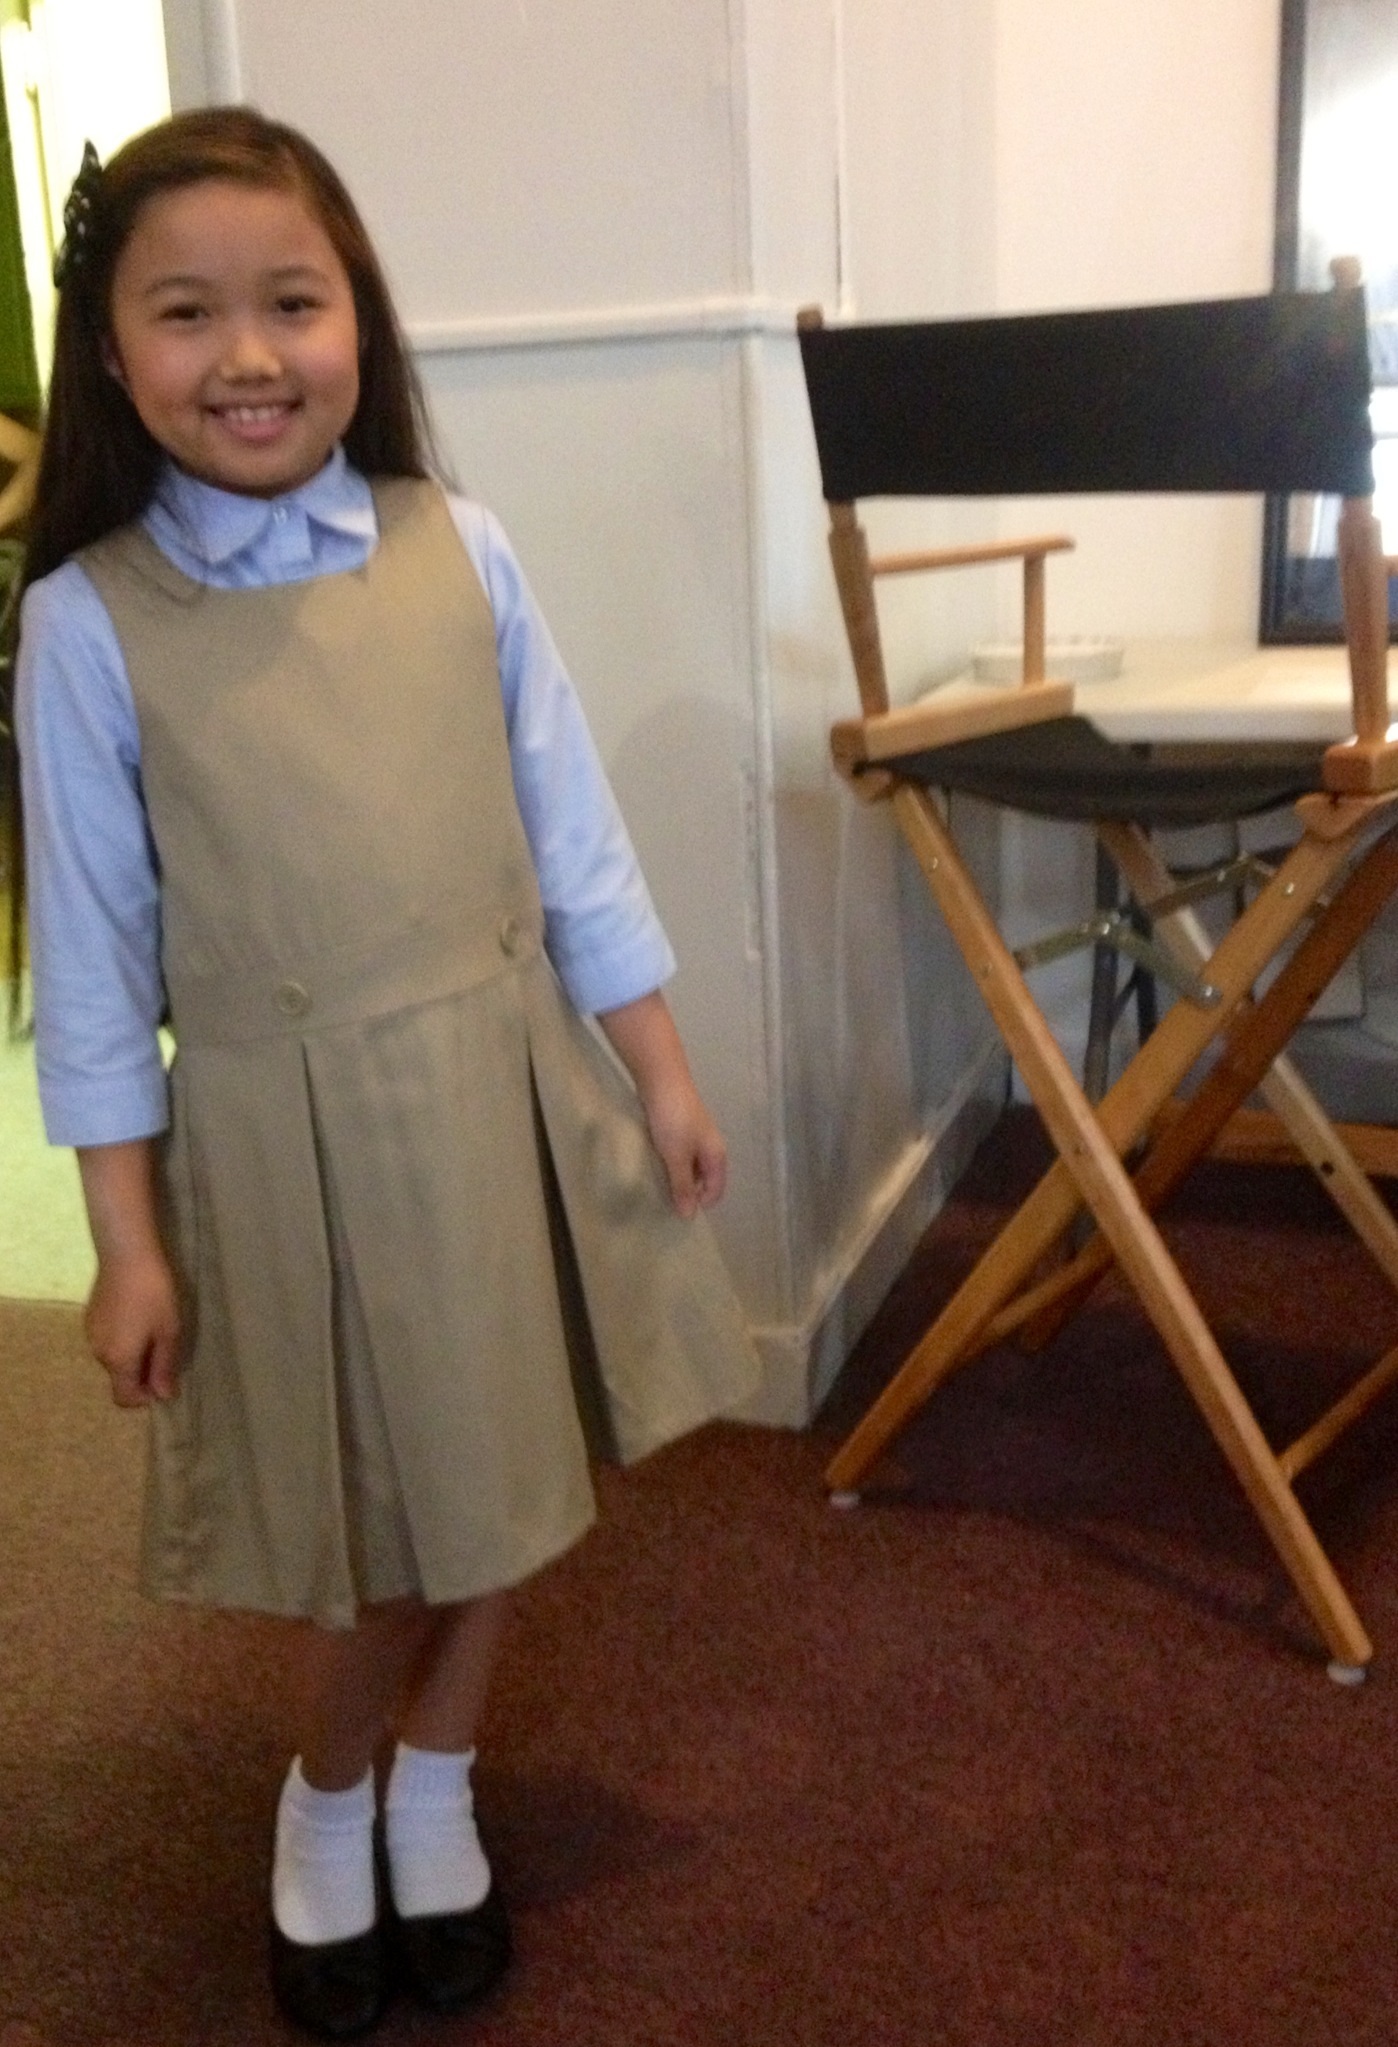 Raina Cheng in school uniform provided by wardrobe for an episode on Person of Interest. 2015